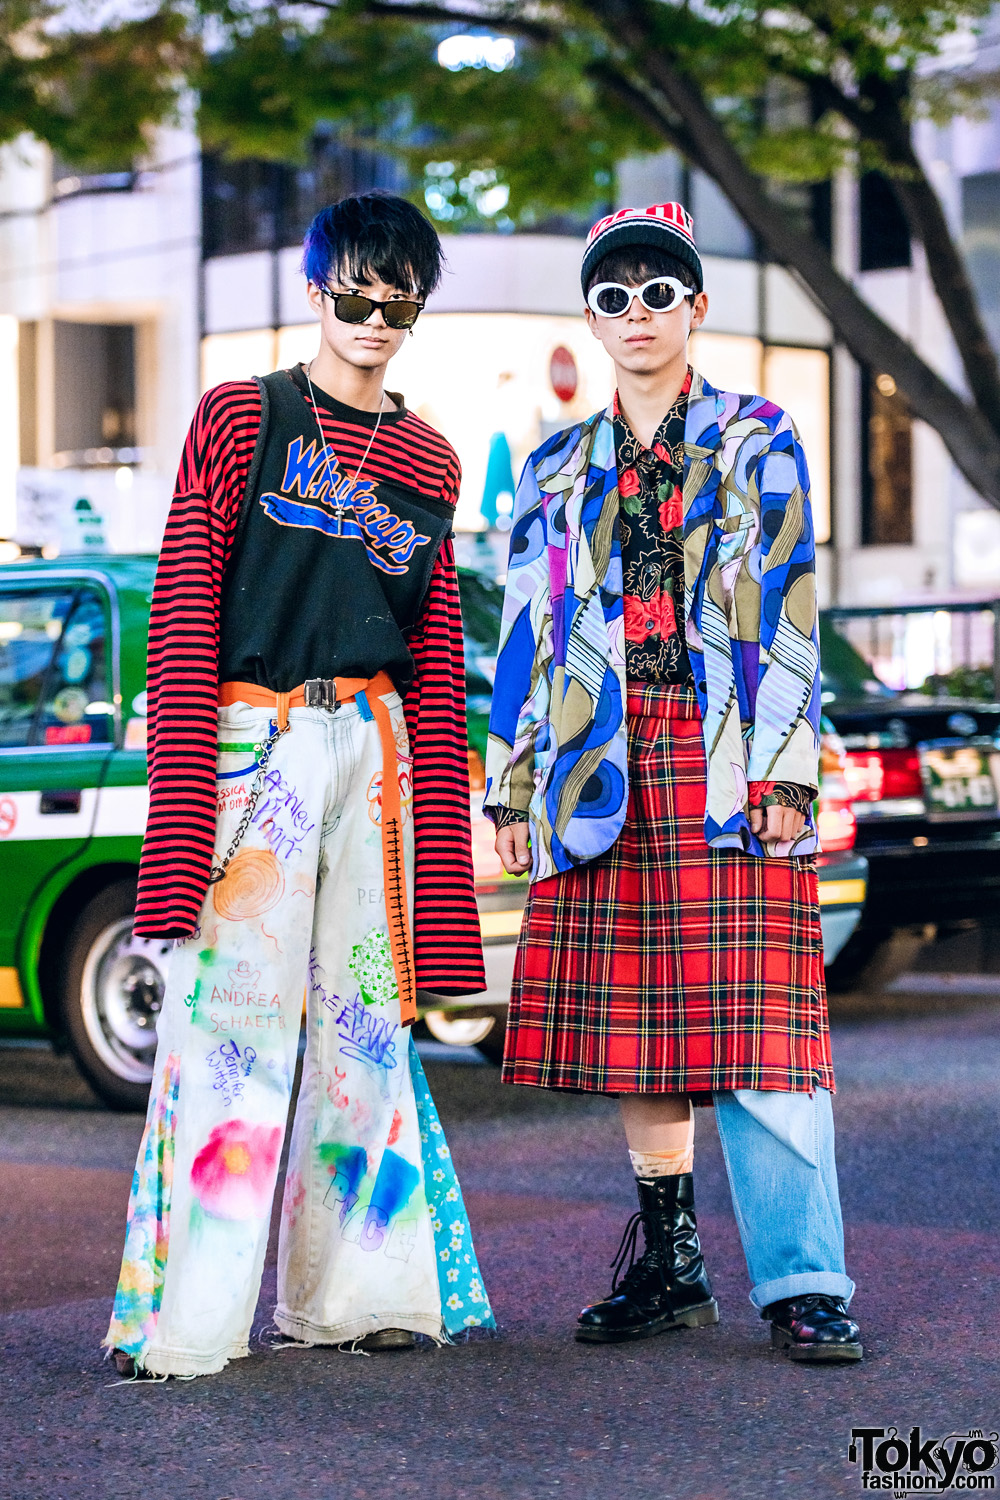 Eclectic Mixed-Prints Streetwear Styles w/ Not Conventional, O.WELL ...